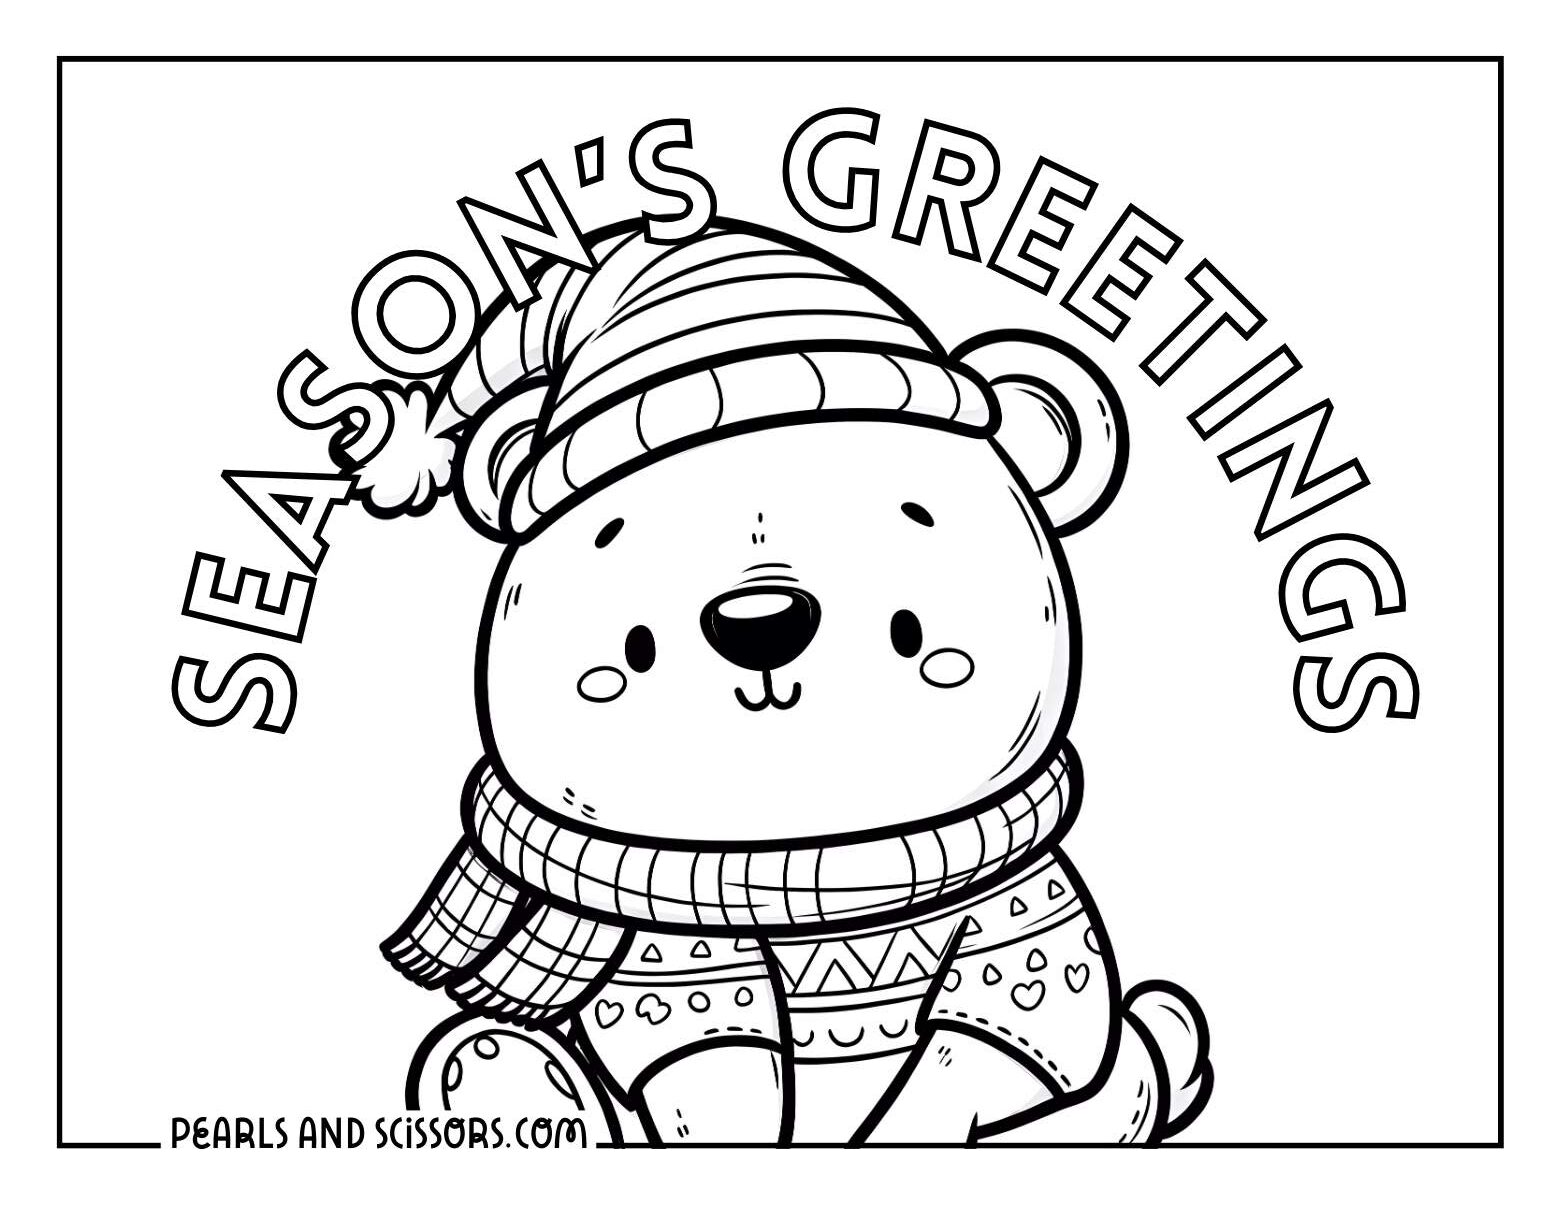 A cute polar bear wearing winter clothes: a beanie and cozy sweater to color.